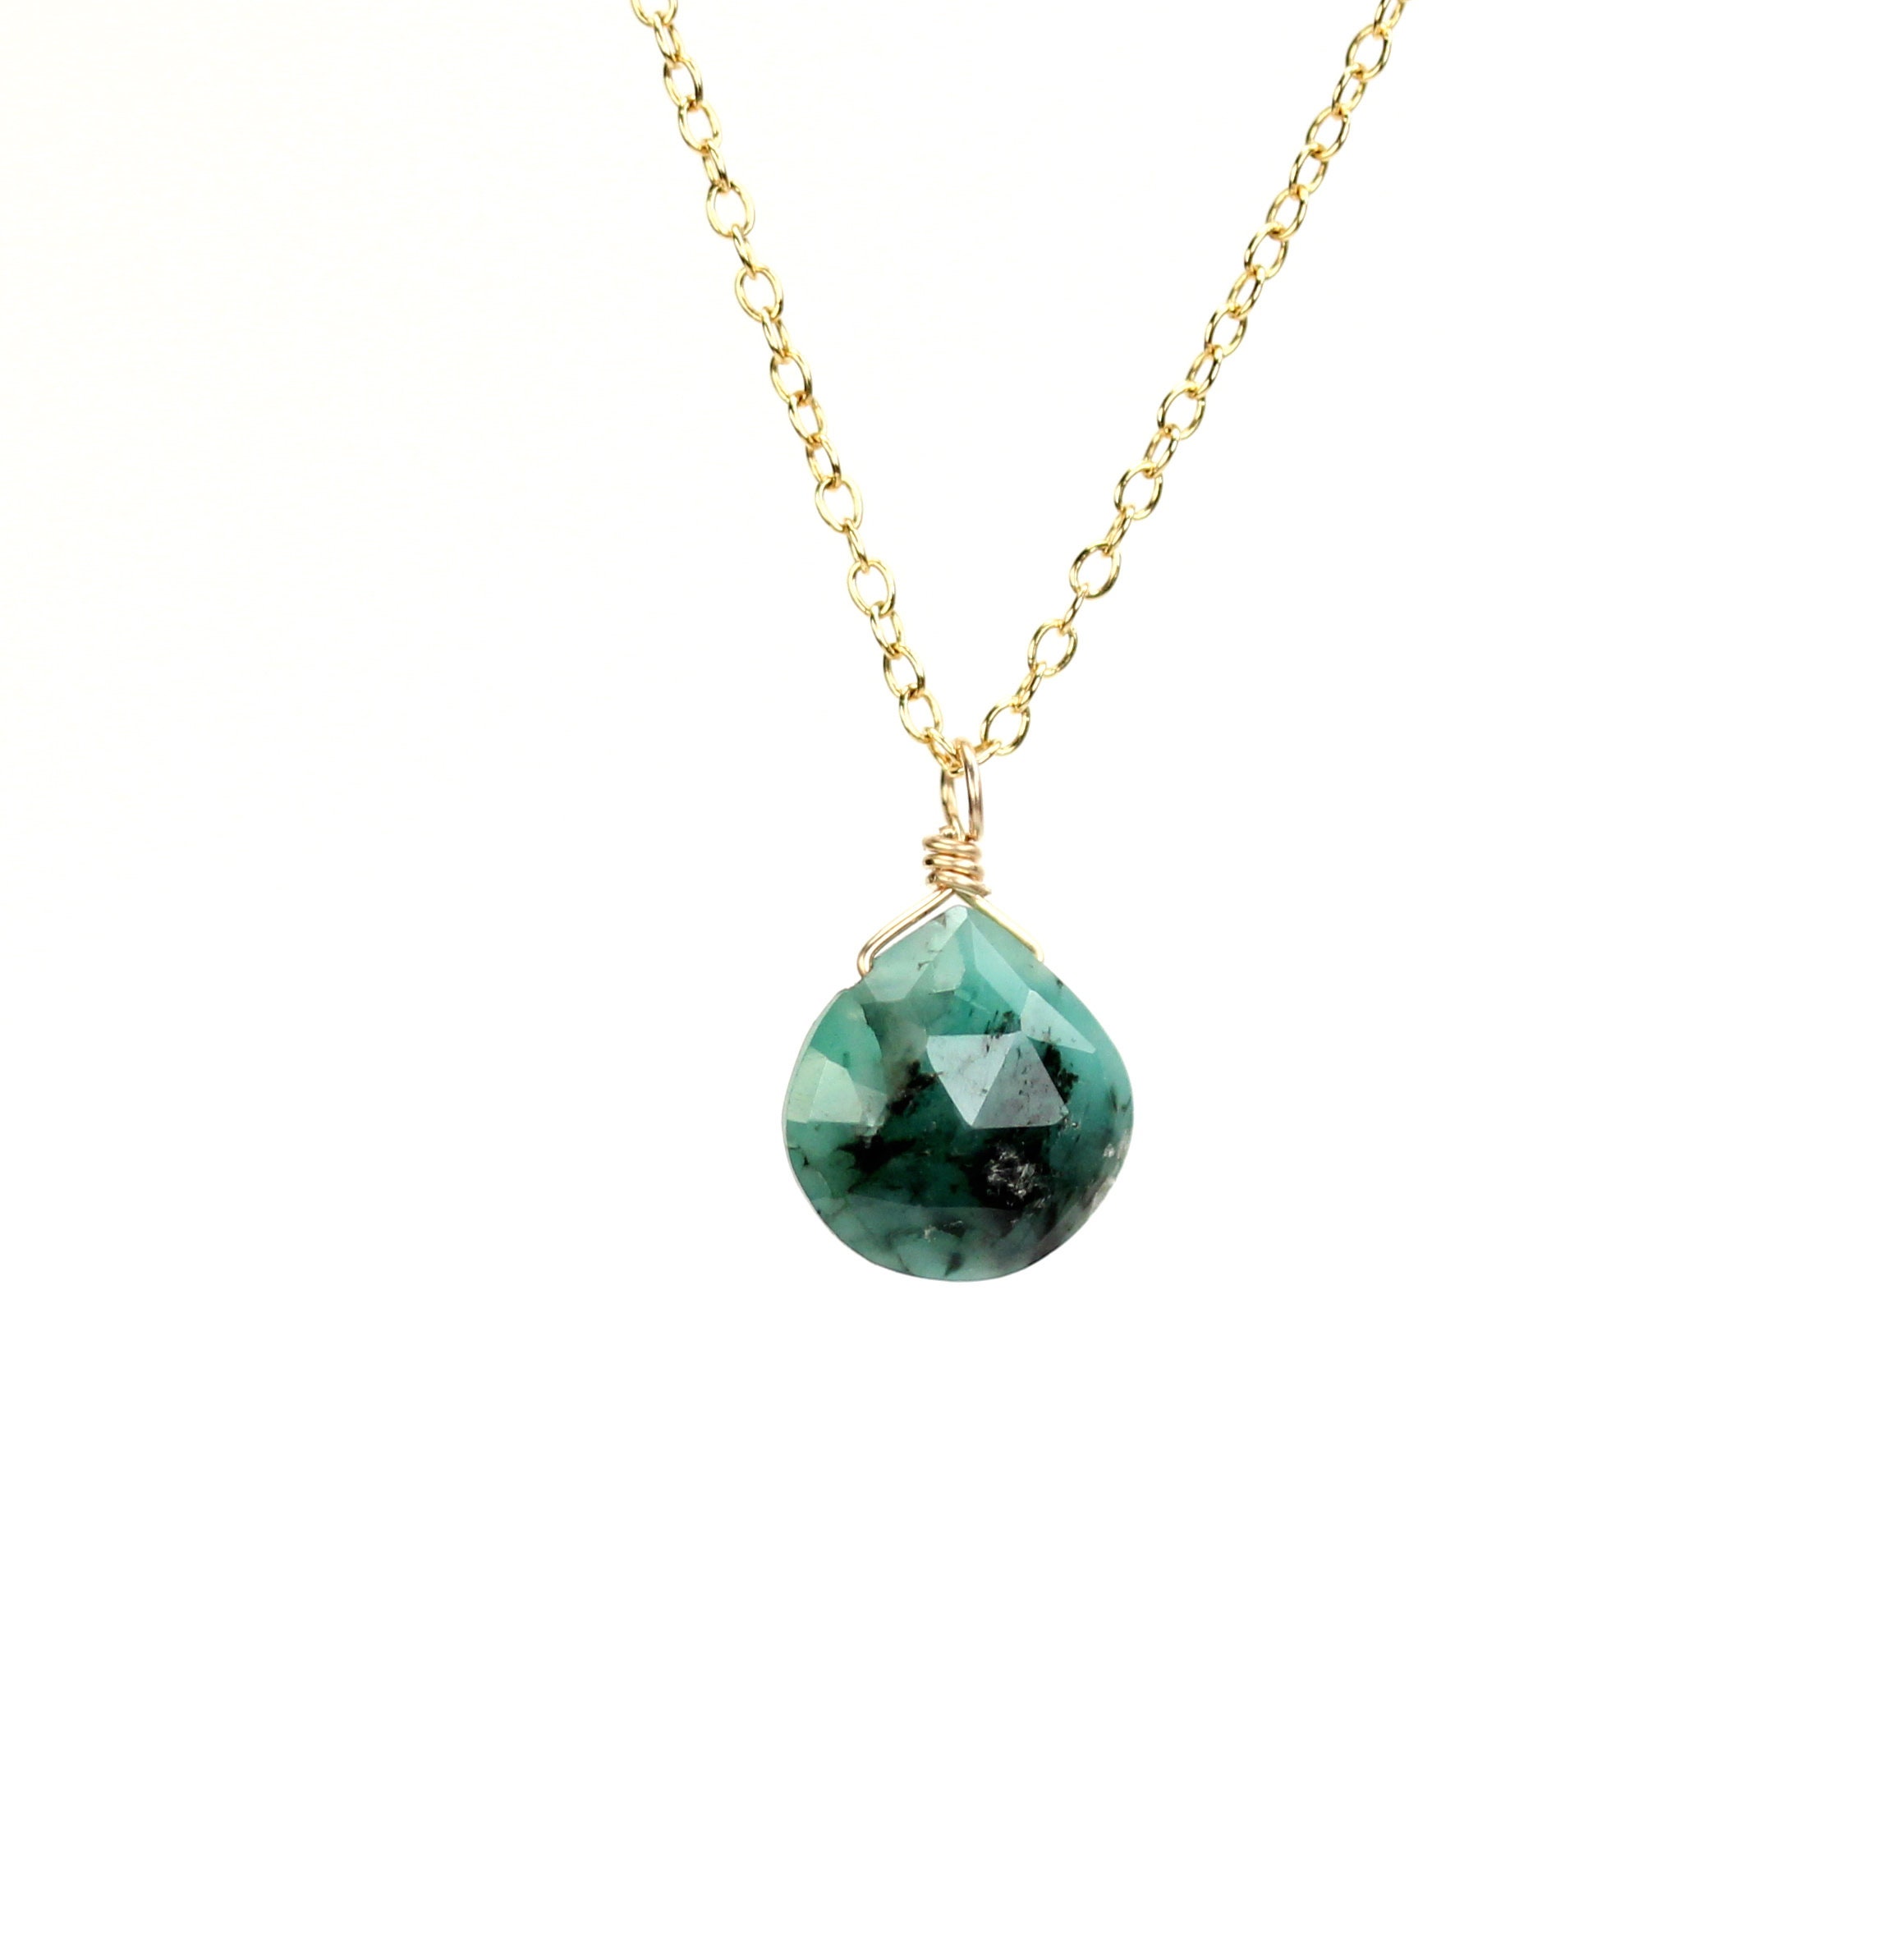 Emerald necklace - green gem necklace - solitaire necklace - floating ...